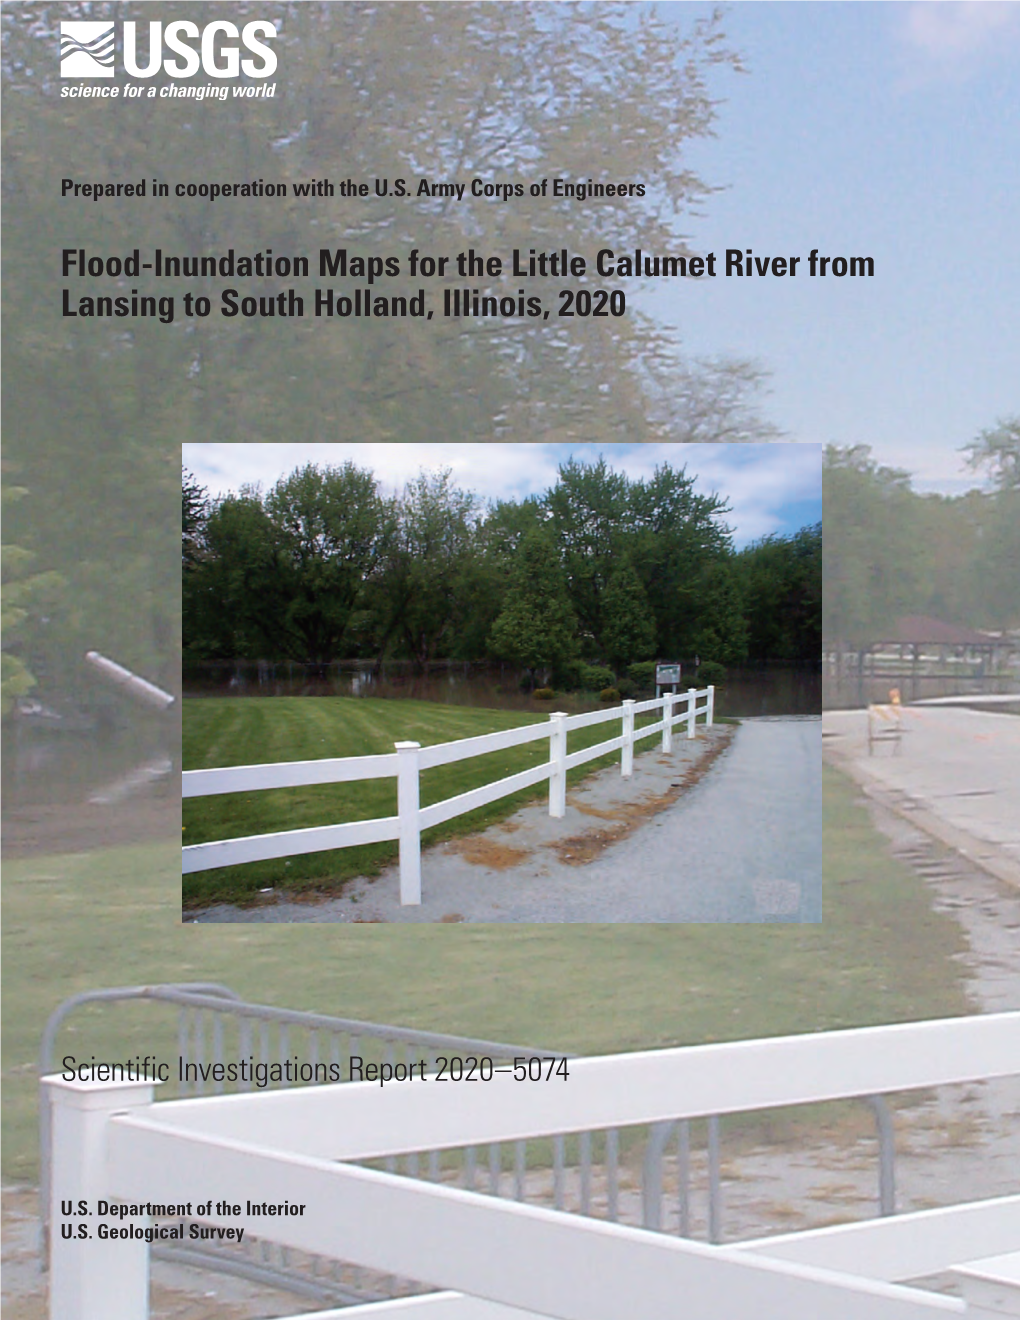 Flood-Inundation Maps for the Little Calumet River from Lansing to South Holland, Illinois, 2020